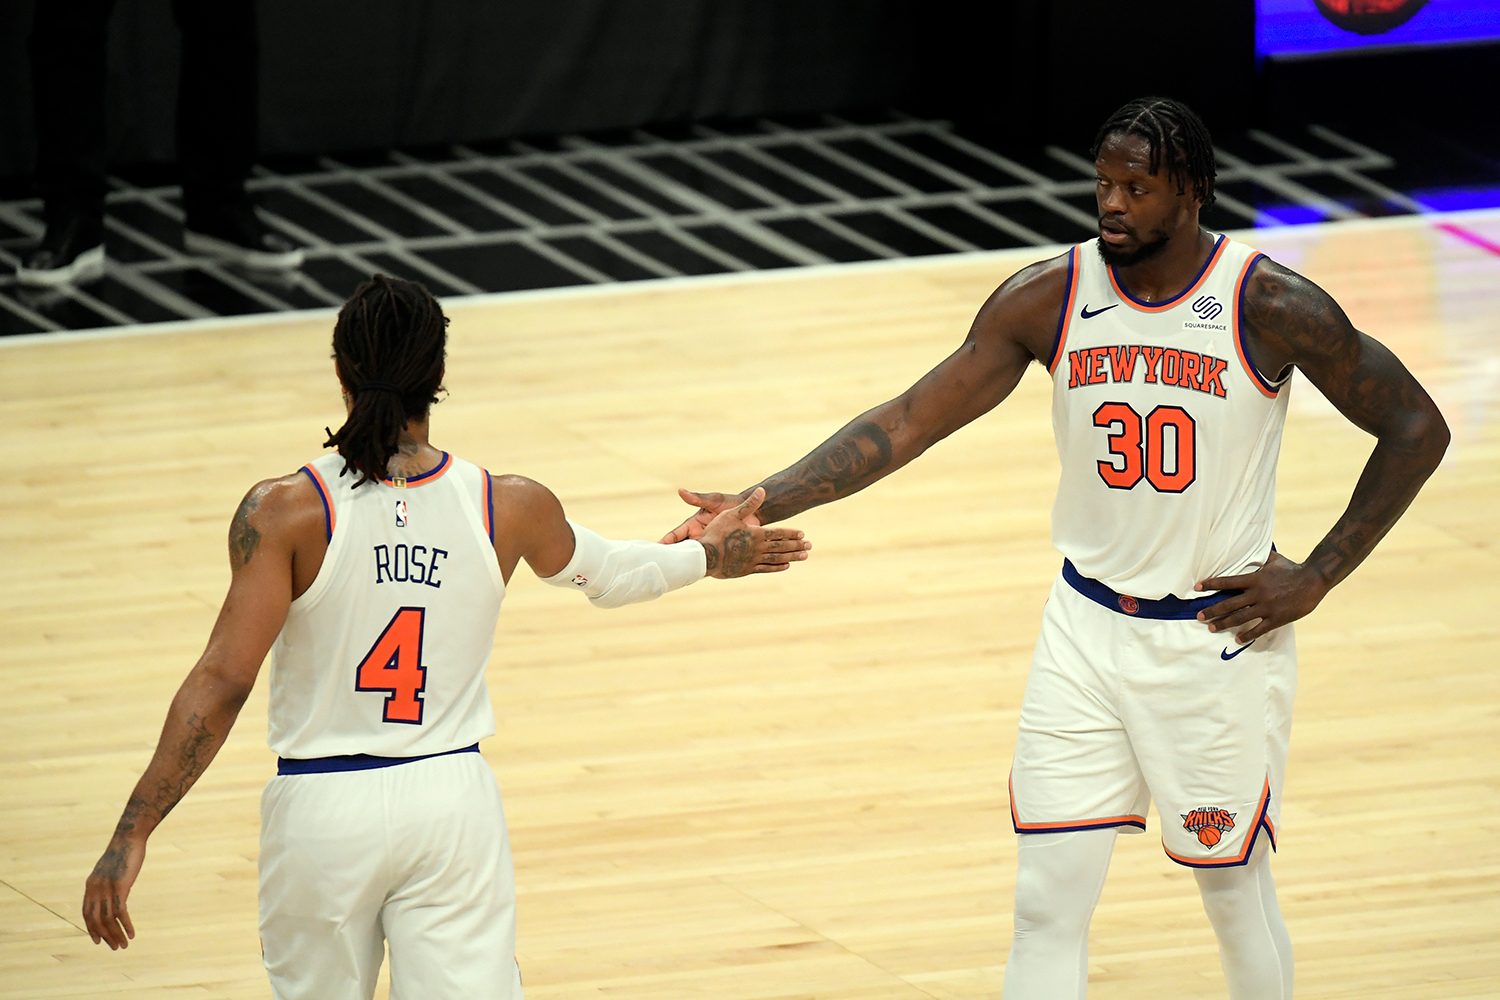 Julius Randle #30 of the New York Knicks and Derrick Rose #4 celebrate after defeating the Los Angeles Clippers